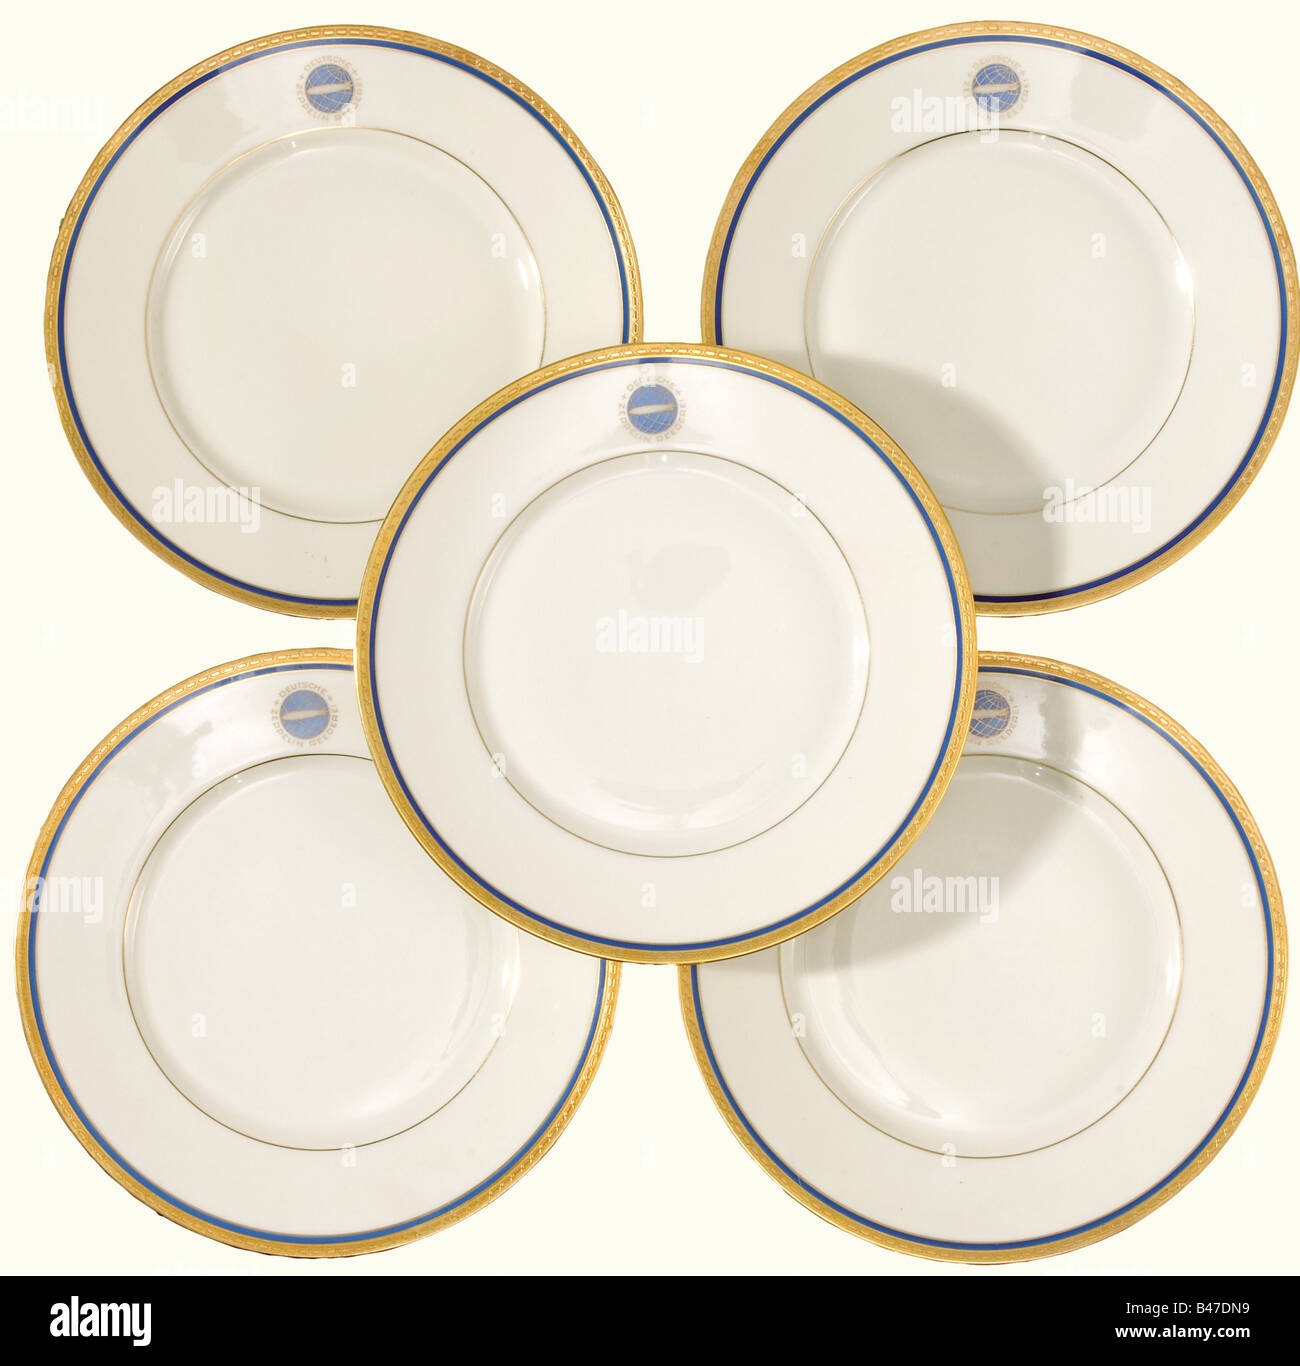 Six cake plates, from the German Zeppelin Shipping Line. Etched gold decorative rims set off with blue, and with the blue-gold emblem of the DZR (Deutsche Zeppelin Reederei) on the borders. Manufacturer's mark on the bottoms, 'Heinrich-Elfenbein-Porzellan Bavaria, Selb' and 'Eigentum der Zeppelin-Reederei' (Property of the Zeppelin Shipping Line). Diameter 20.3 cm. historic, historical, 20th century, transport, transportation, object, objects, stills, dishes, dish, plate, plates, porcelain, chinaware, Stock Photo